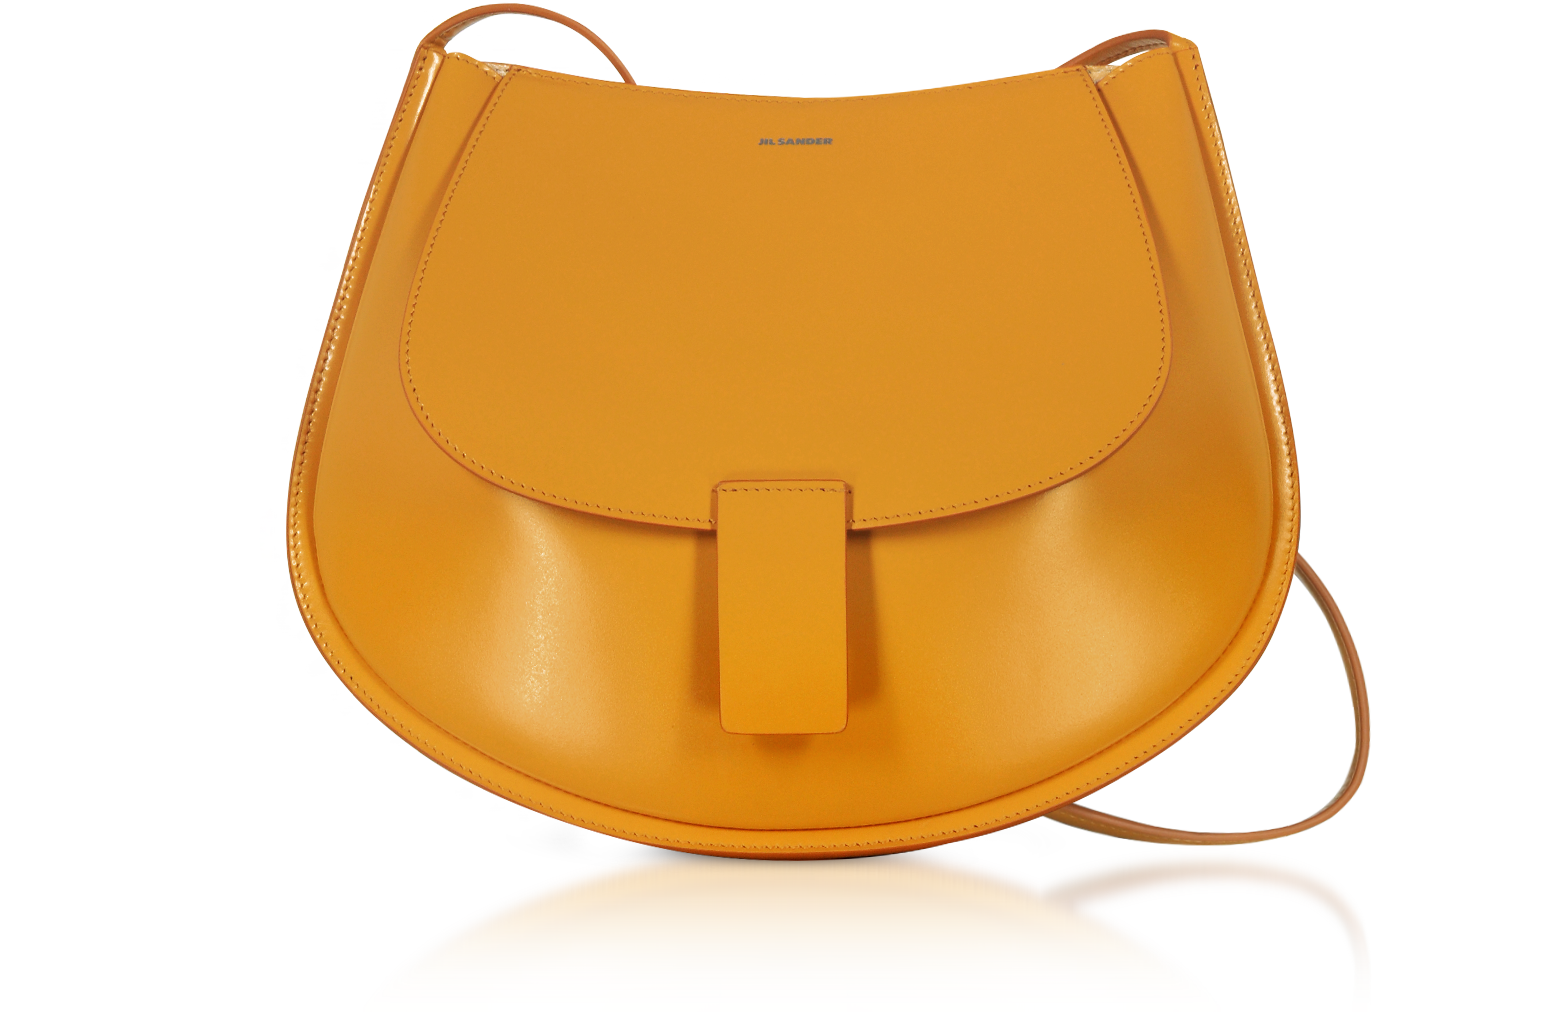 Jil Sander Mustard Yellow Leather Small Crescent Shoulder Bag at FORZIERI